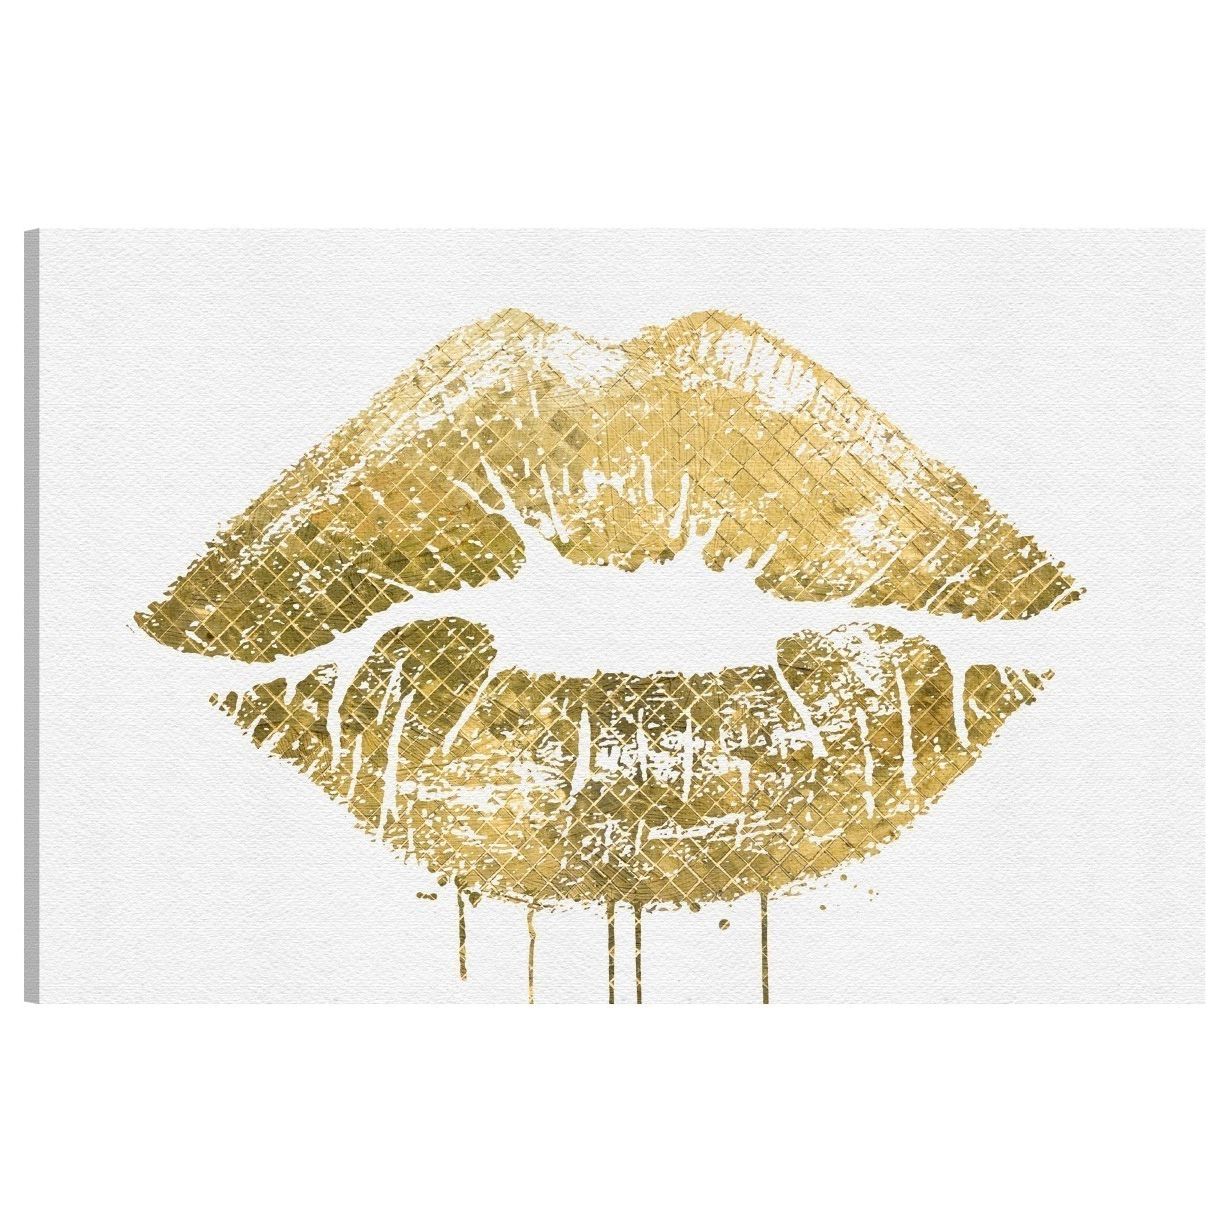 Gold Wall Art Inside Best And Newest Stunning Design Gold Wall Art Stickers Decor Canvas Uk, Metal Wall (View 9 of 15)